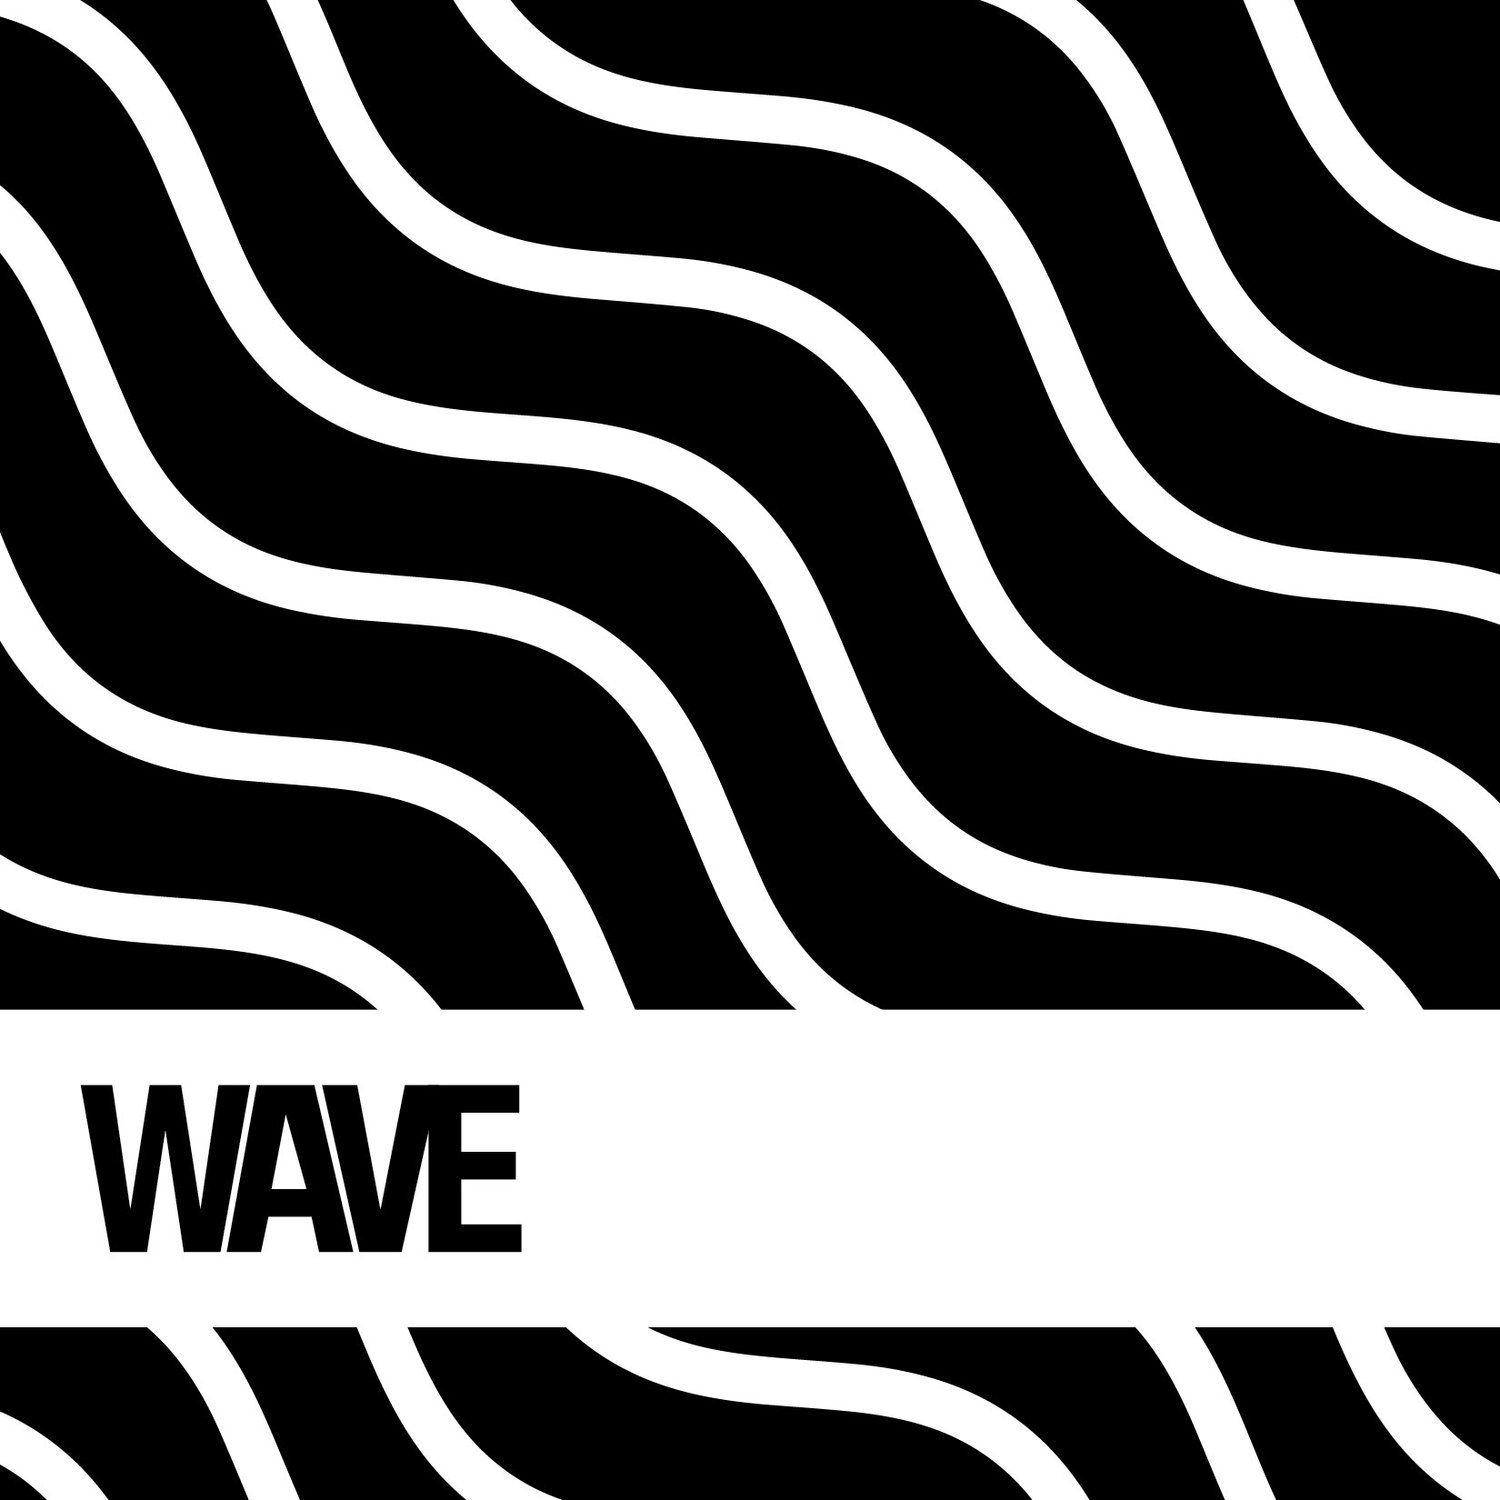 Black and White Wave Logo - WAVE